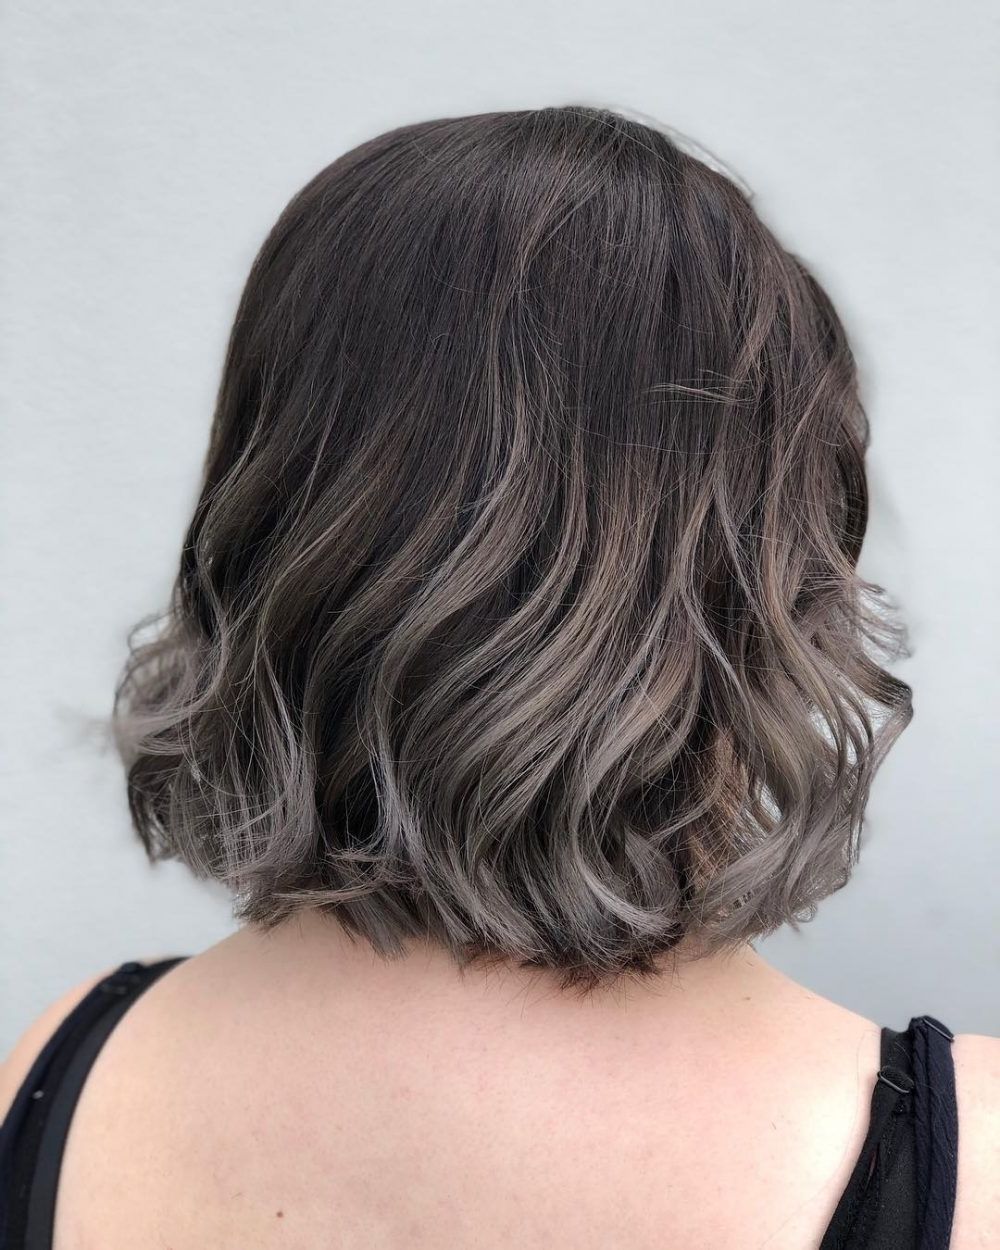 36 Best Short Ombre Hair Ideas Of 2018 Within Most Current Reverse Gray Ombre For Short Hair (View 13 of 15)